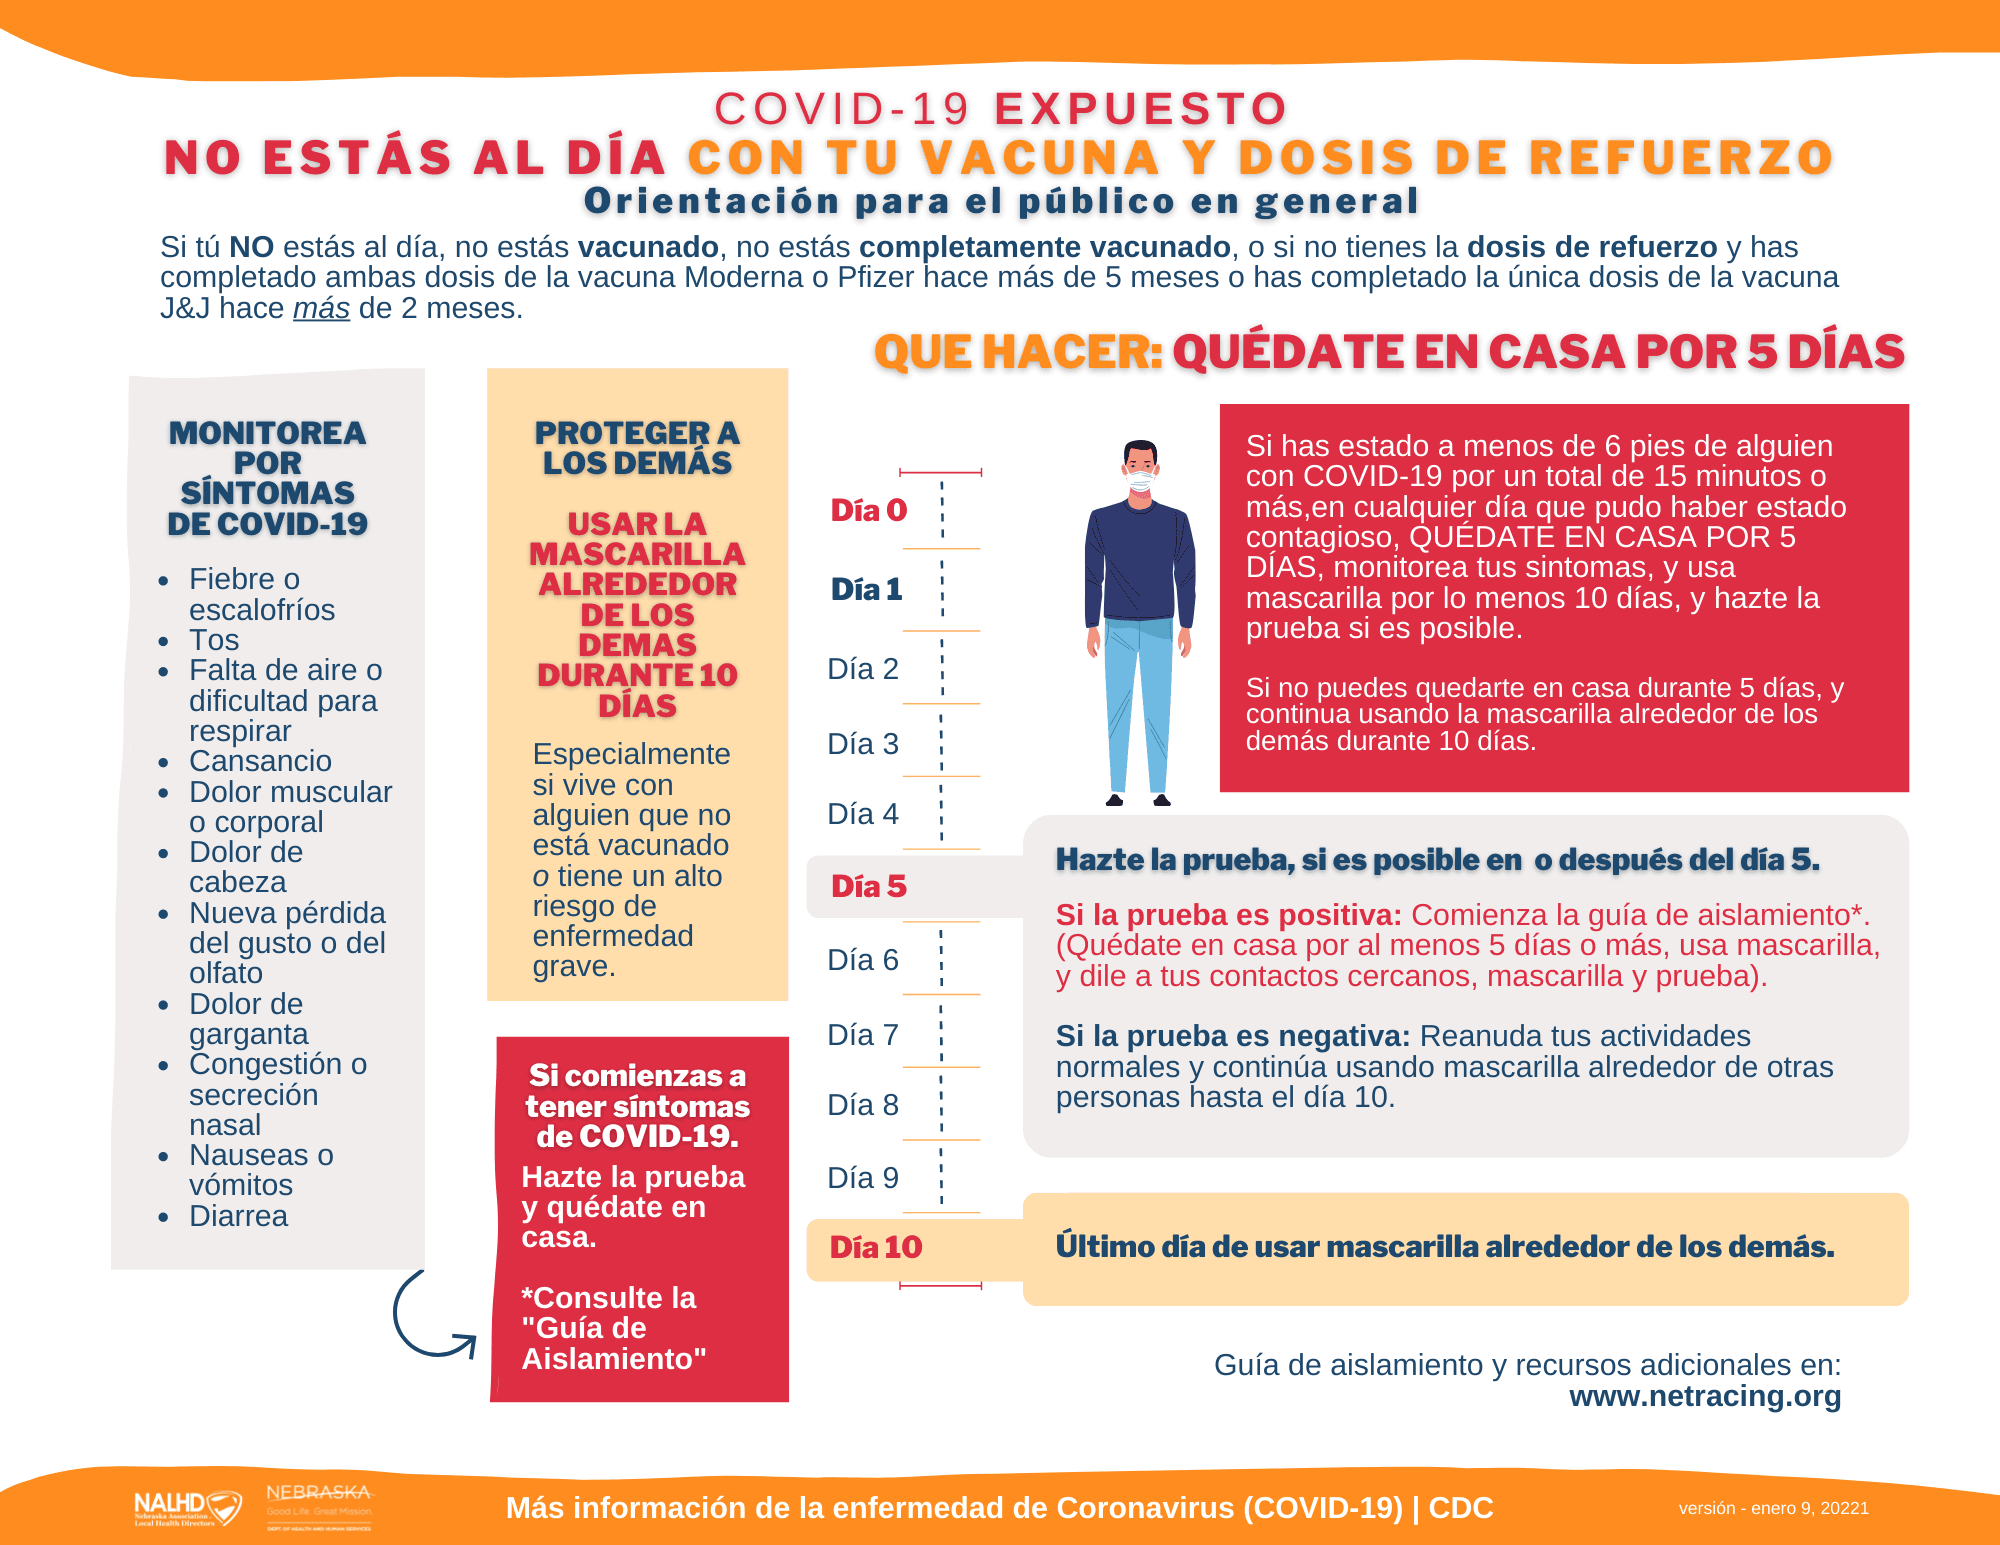 Spanish Version - Exposed, and NOT Up-to-date